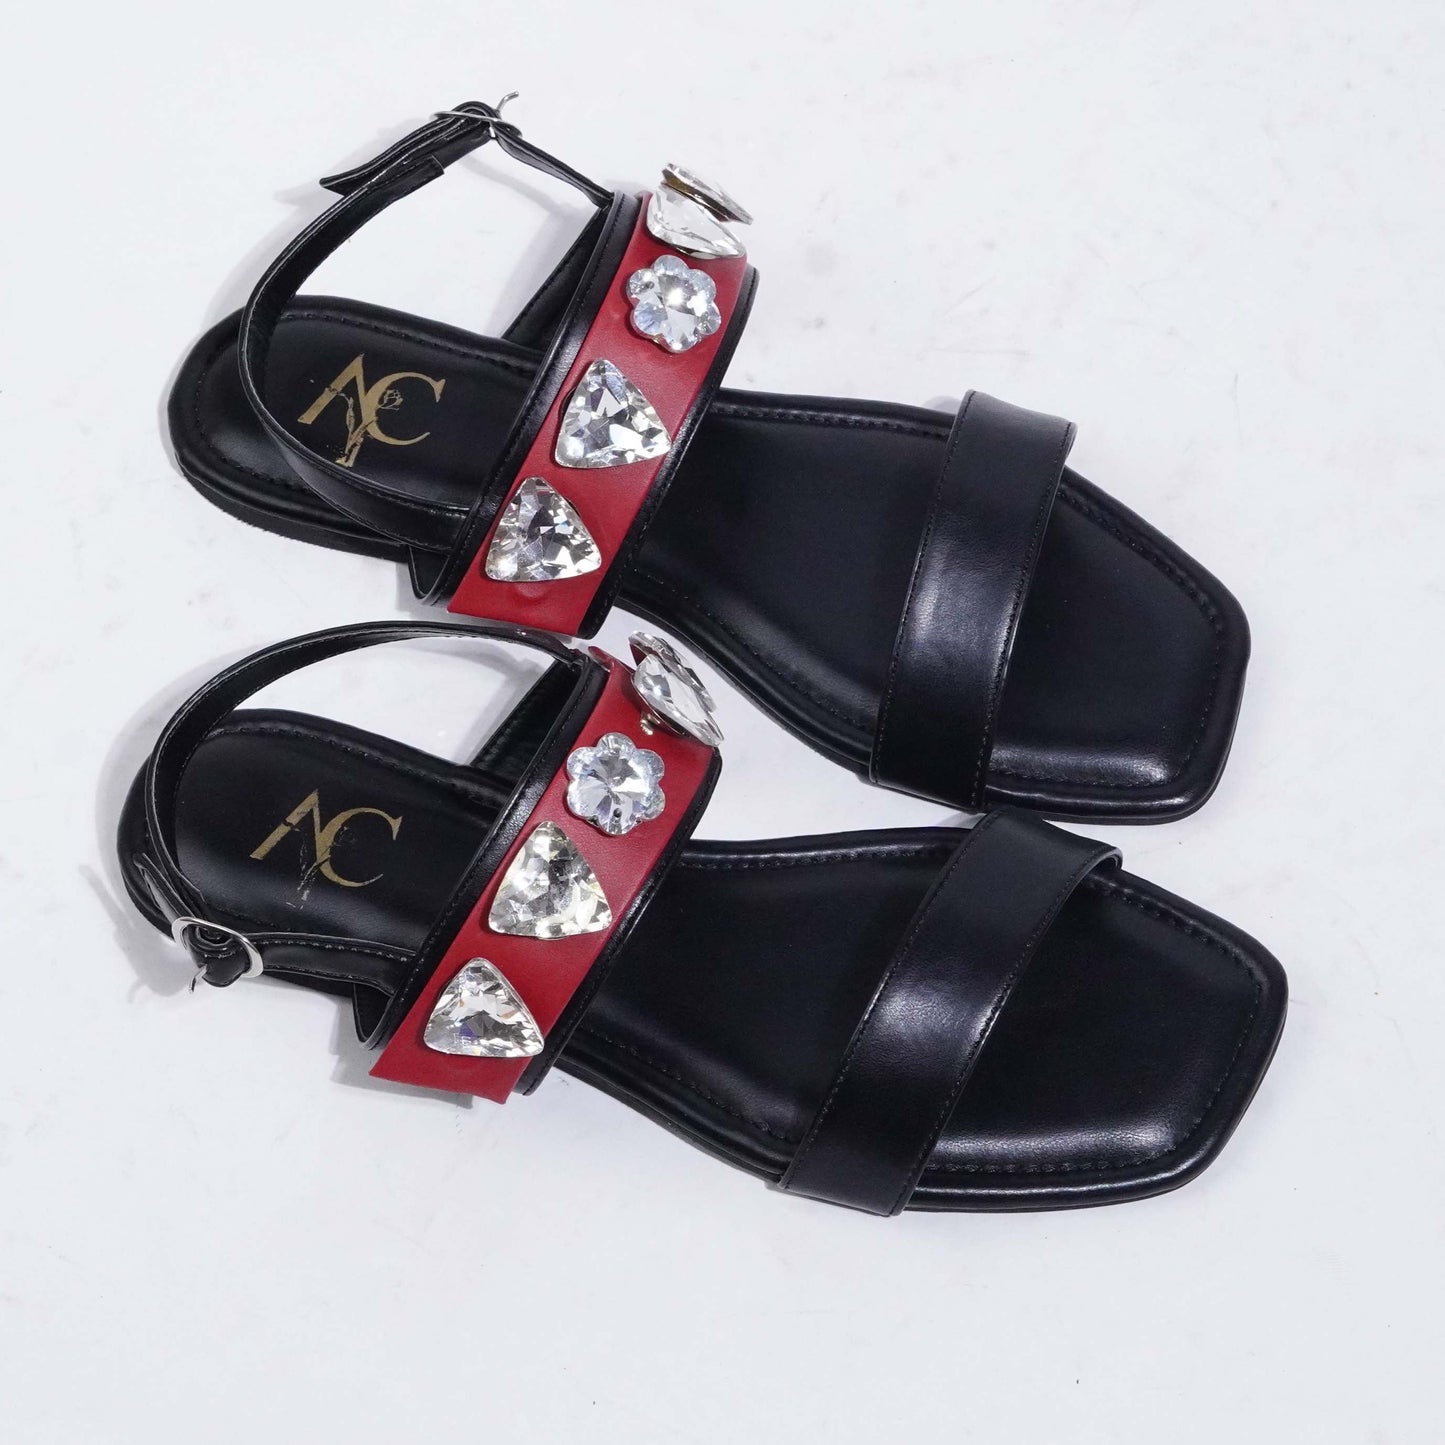 Duo Chic Sandals